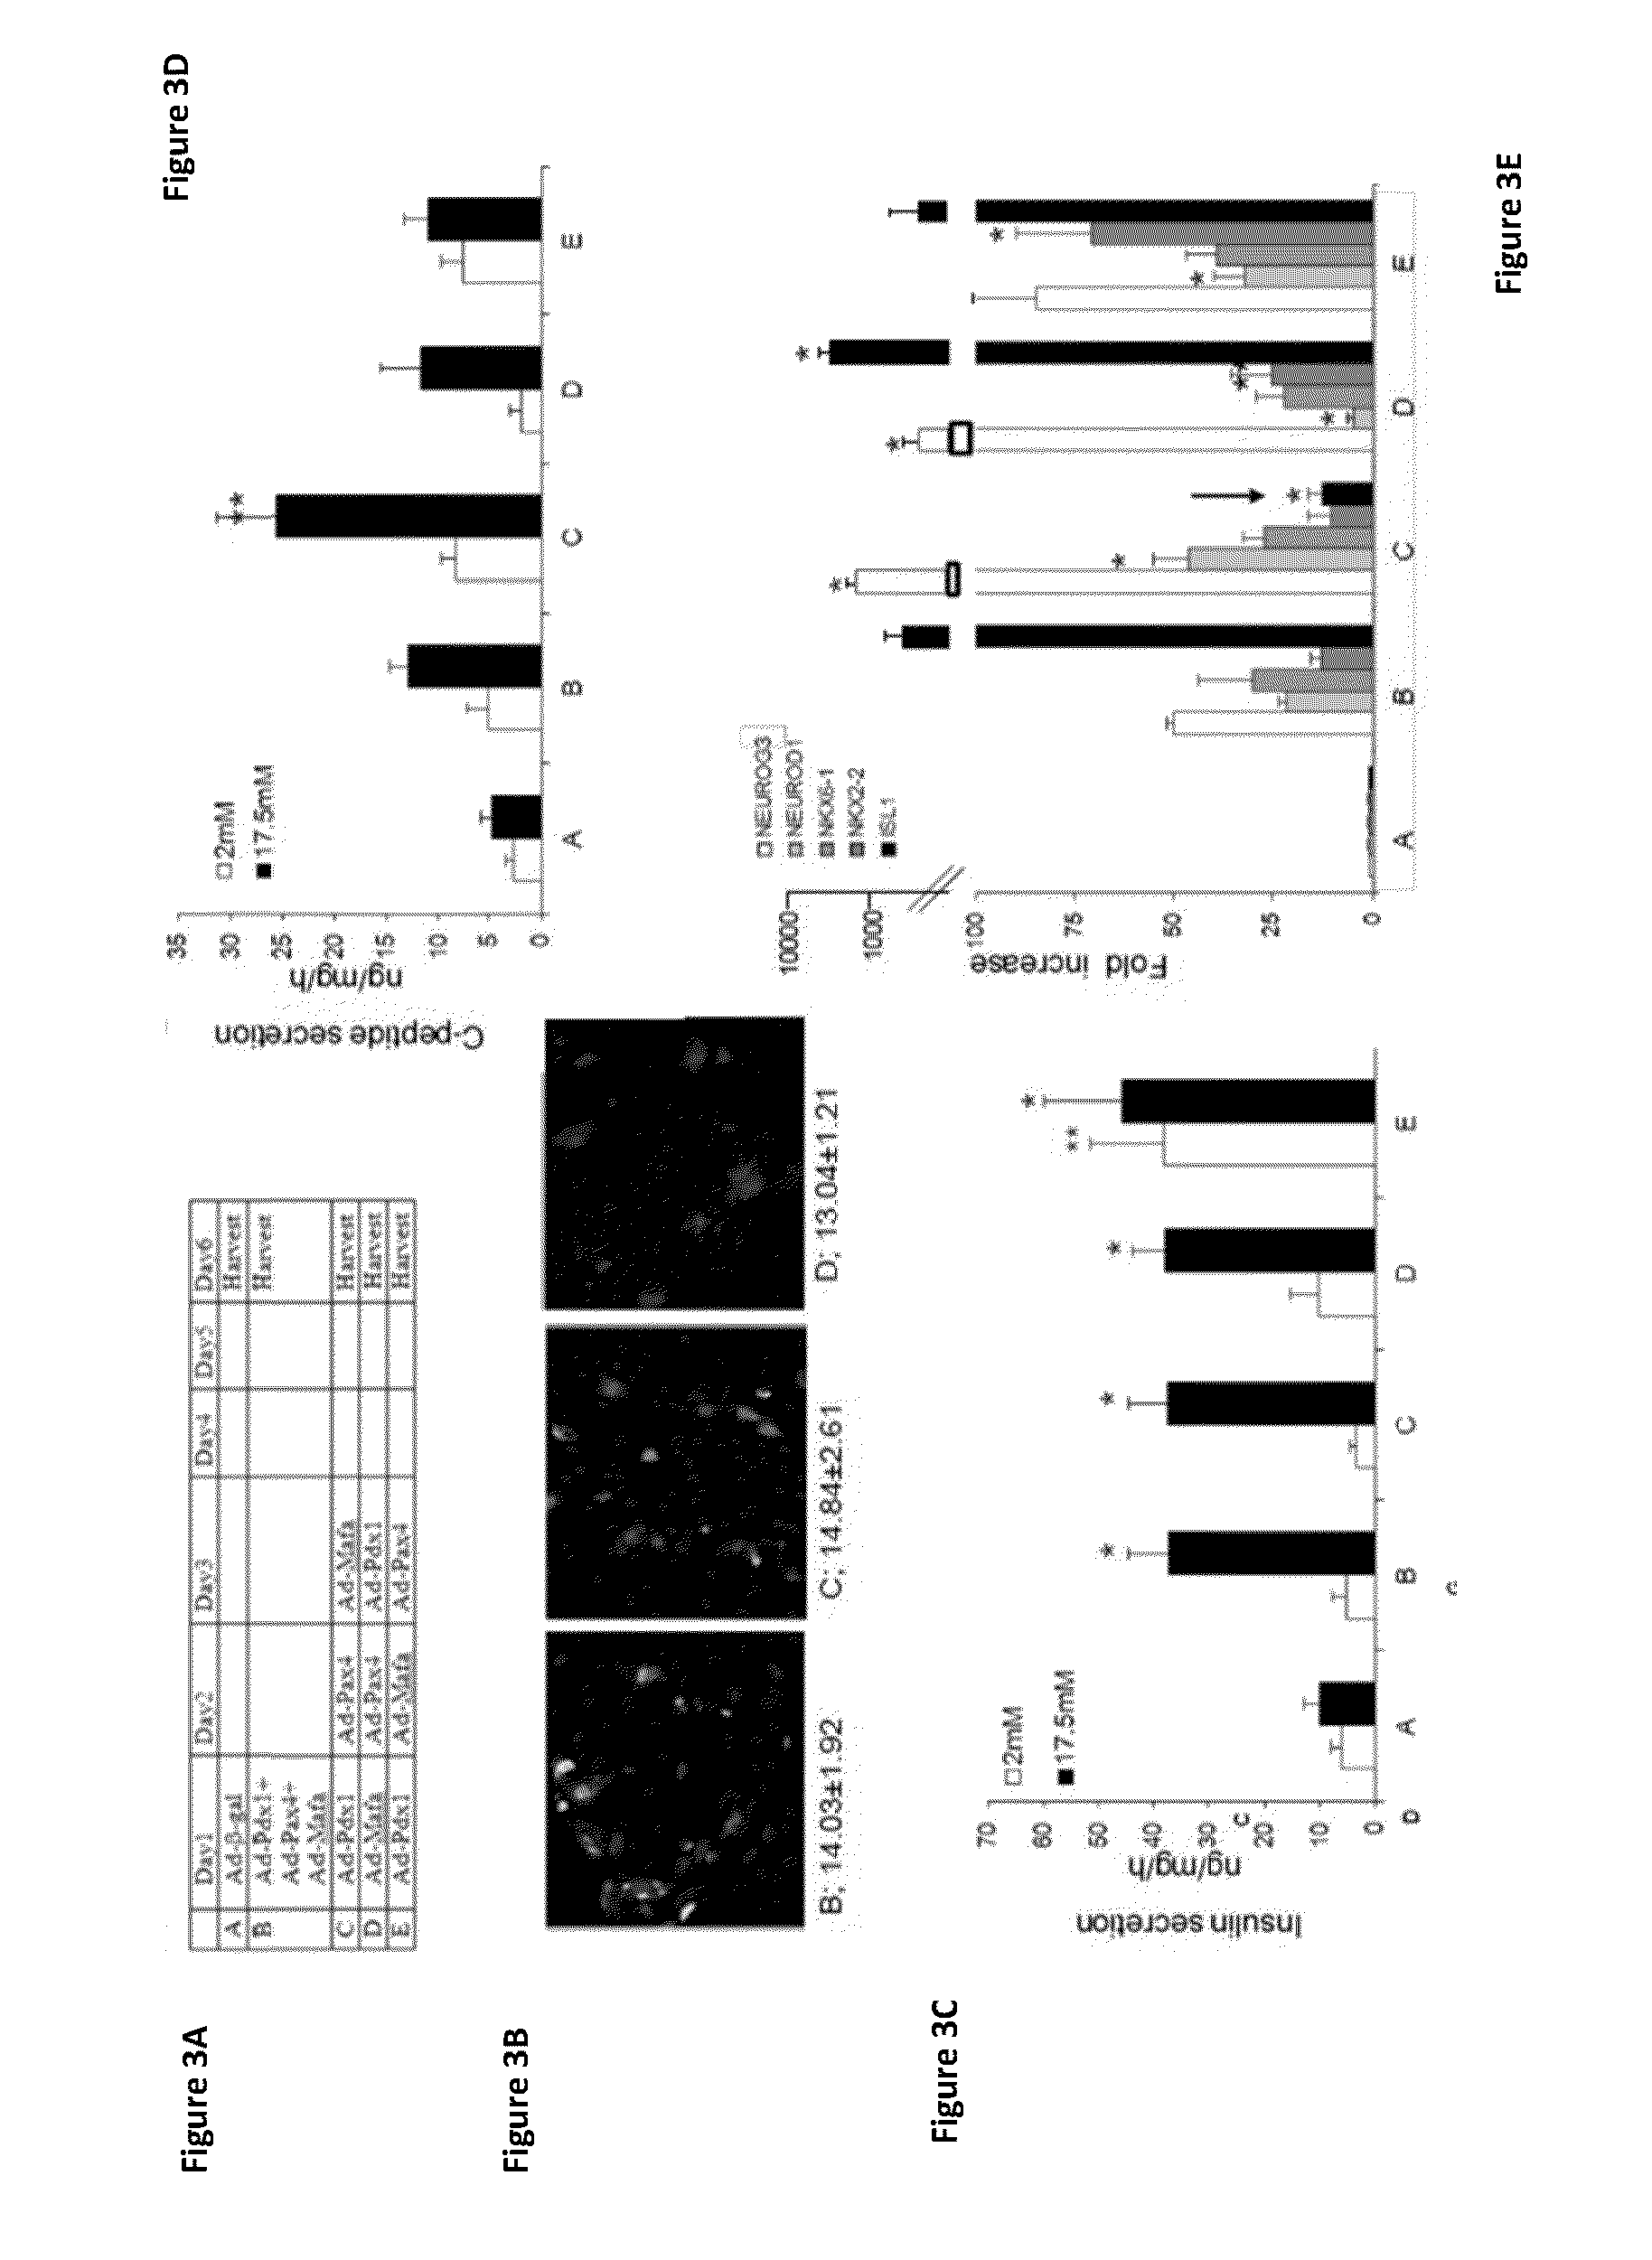 Methods of transdifferentiation and methods of use thereof